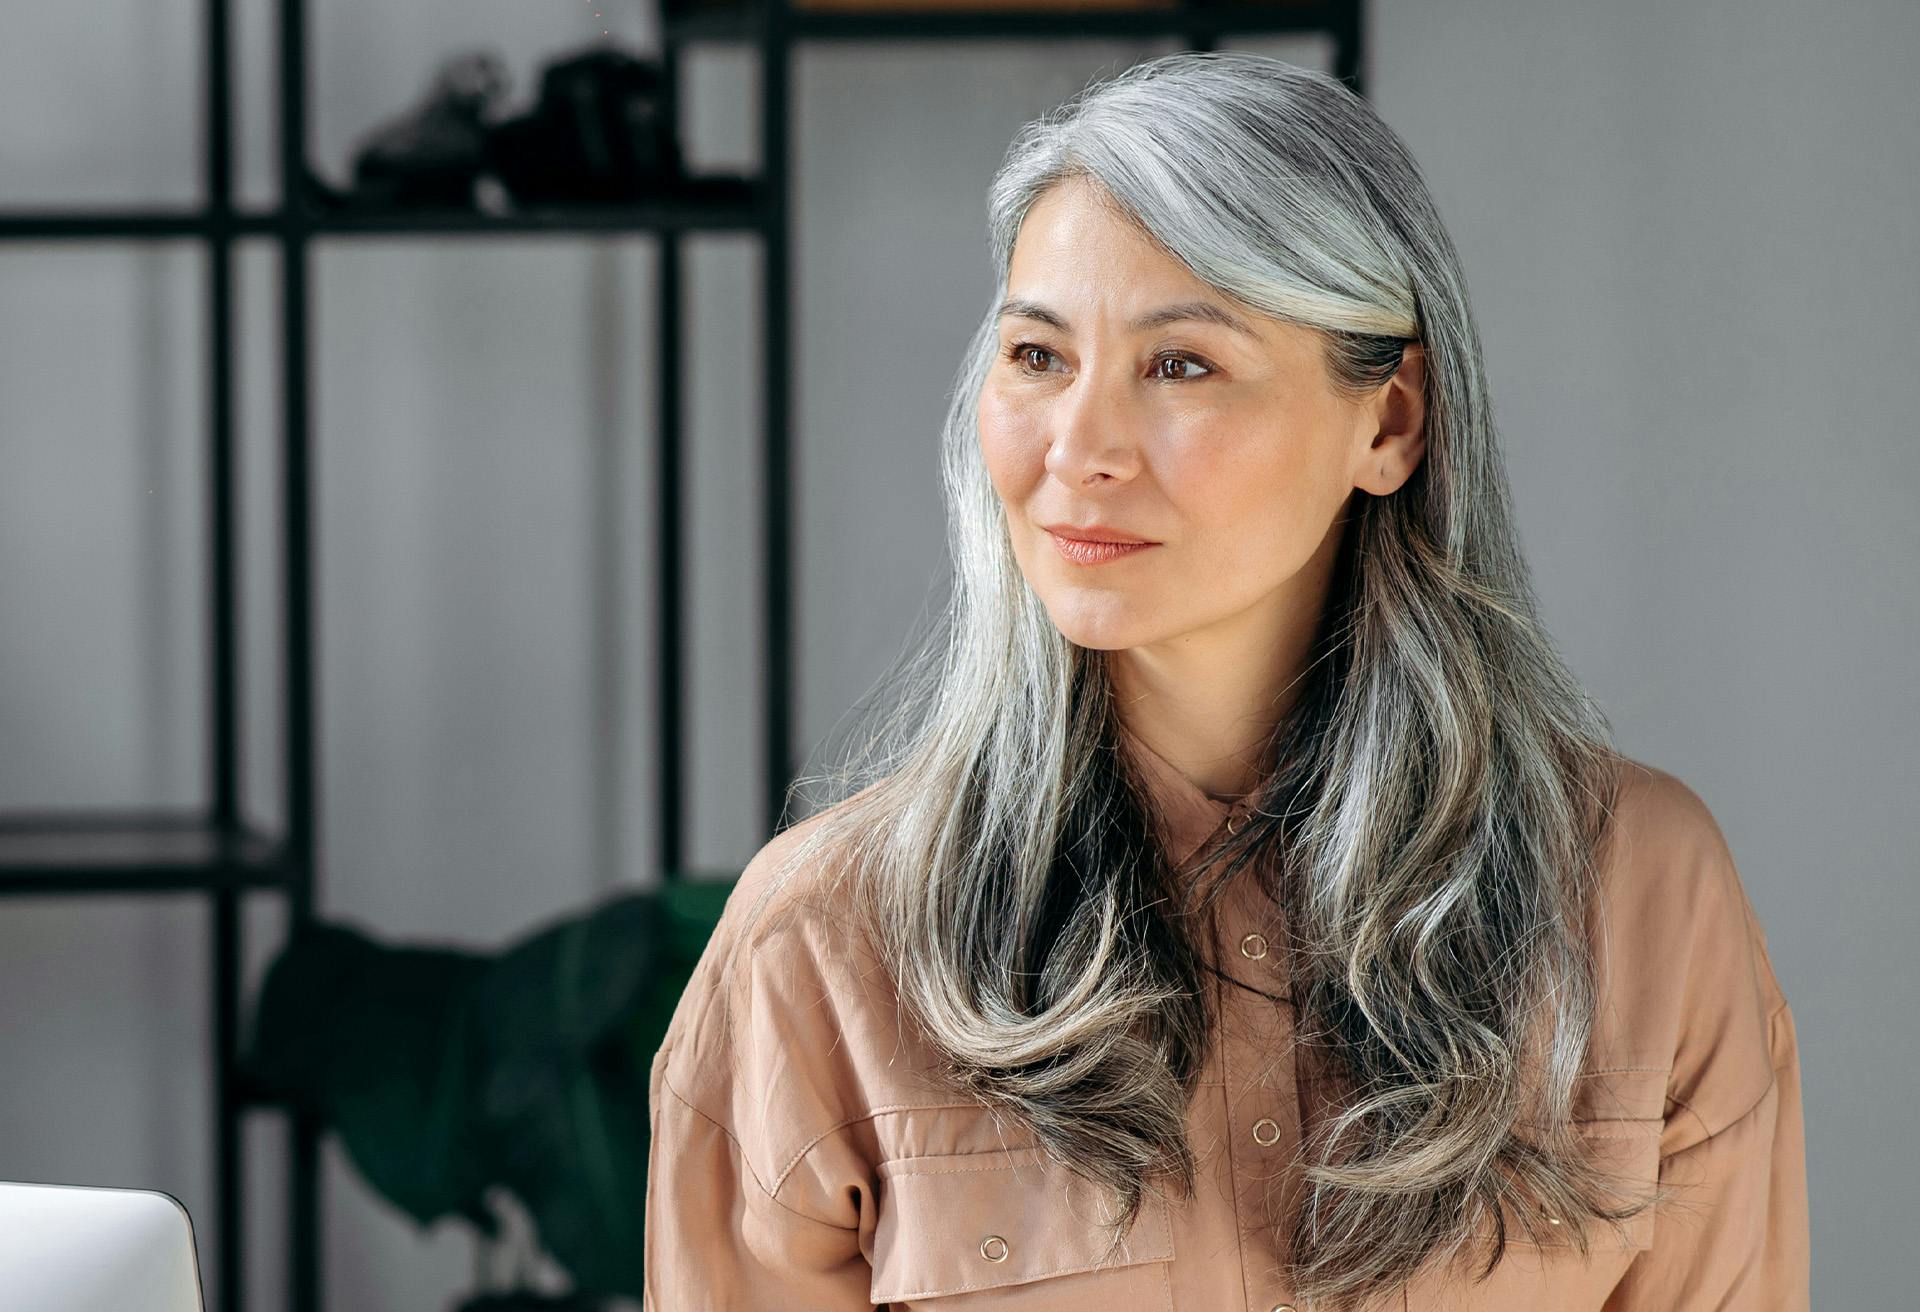 Grey haired woman smiling and looking to the side.